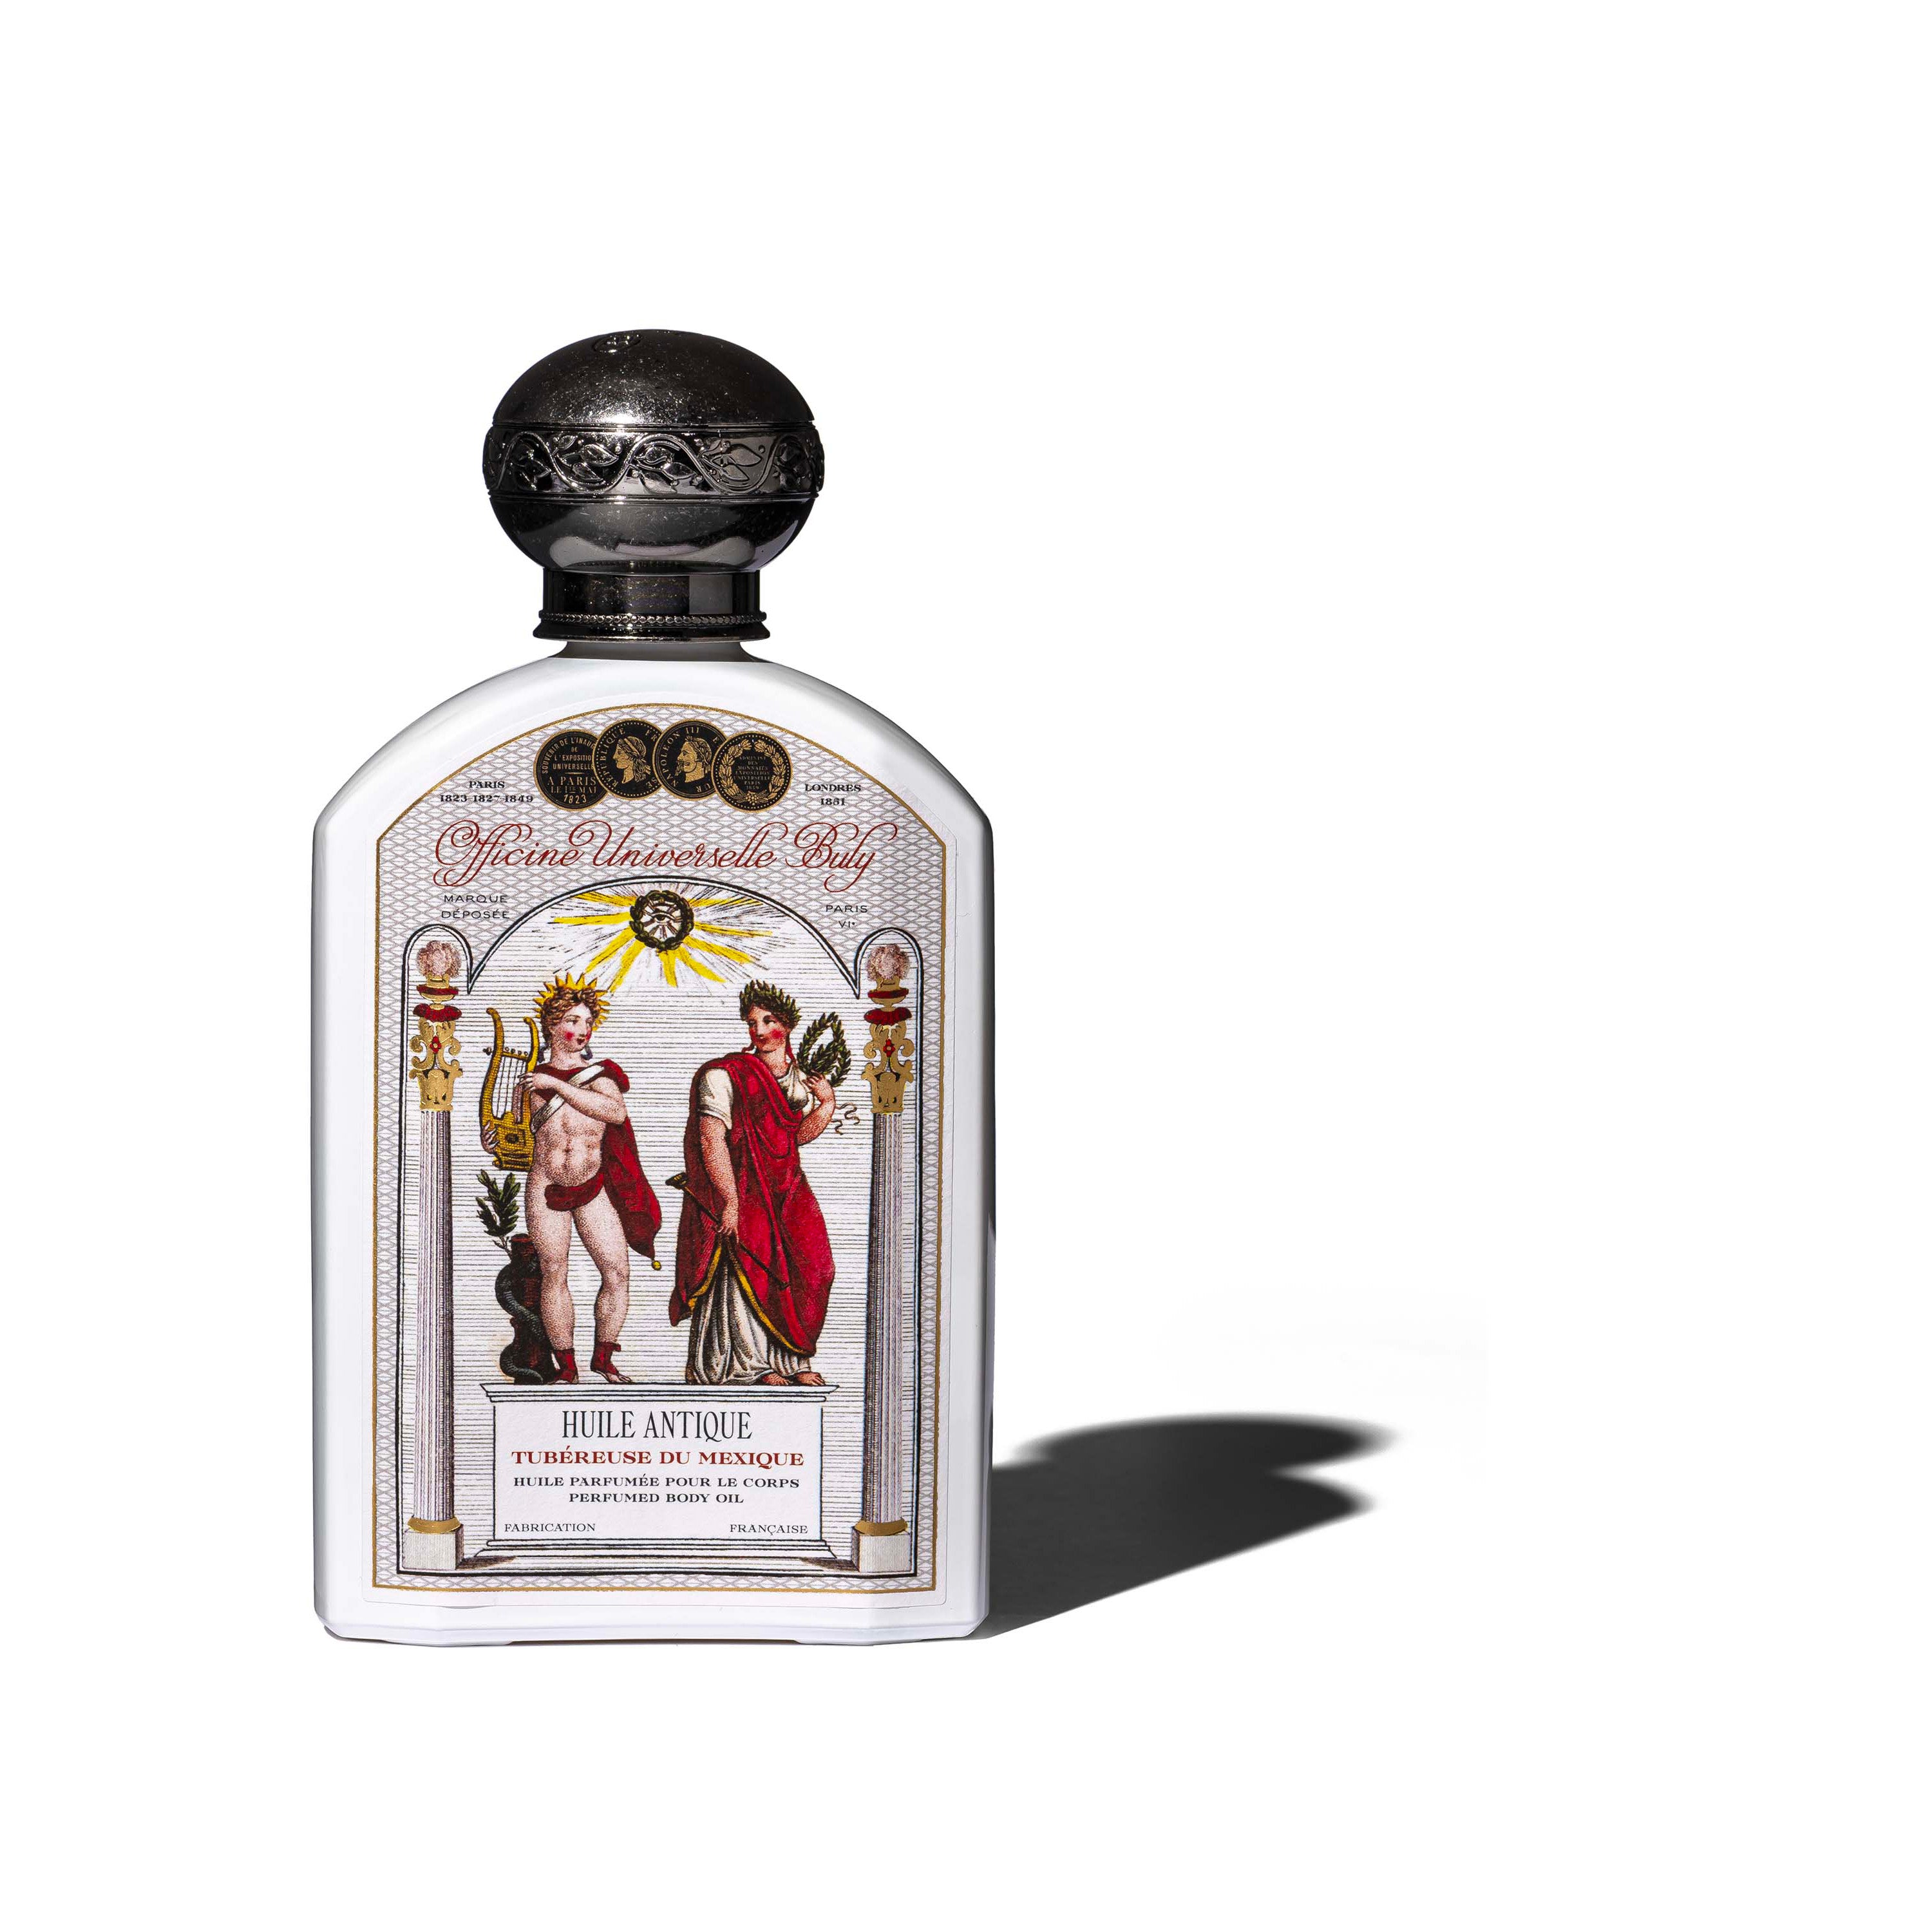 PERFUME ONESELF – Officine Universelle Buly